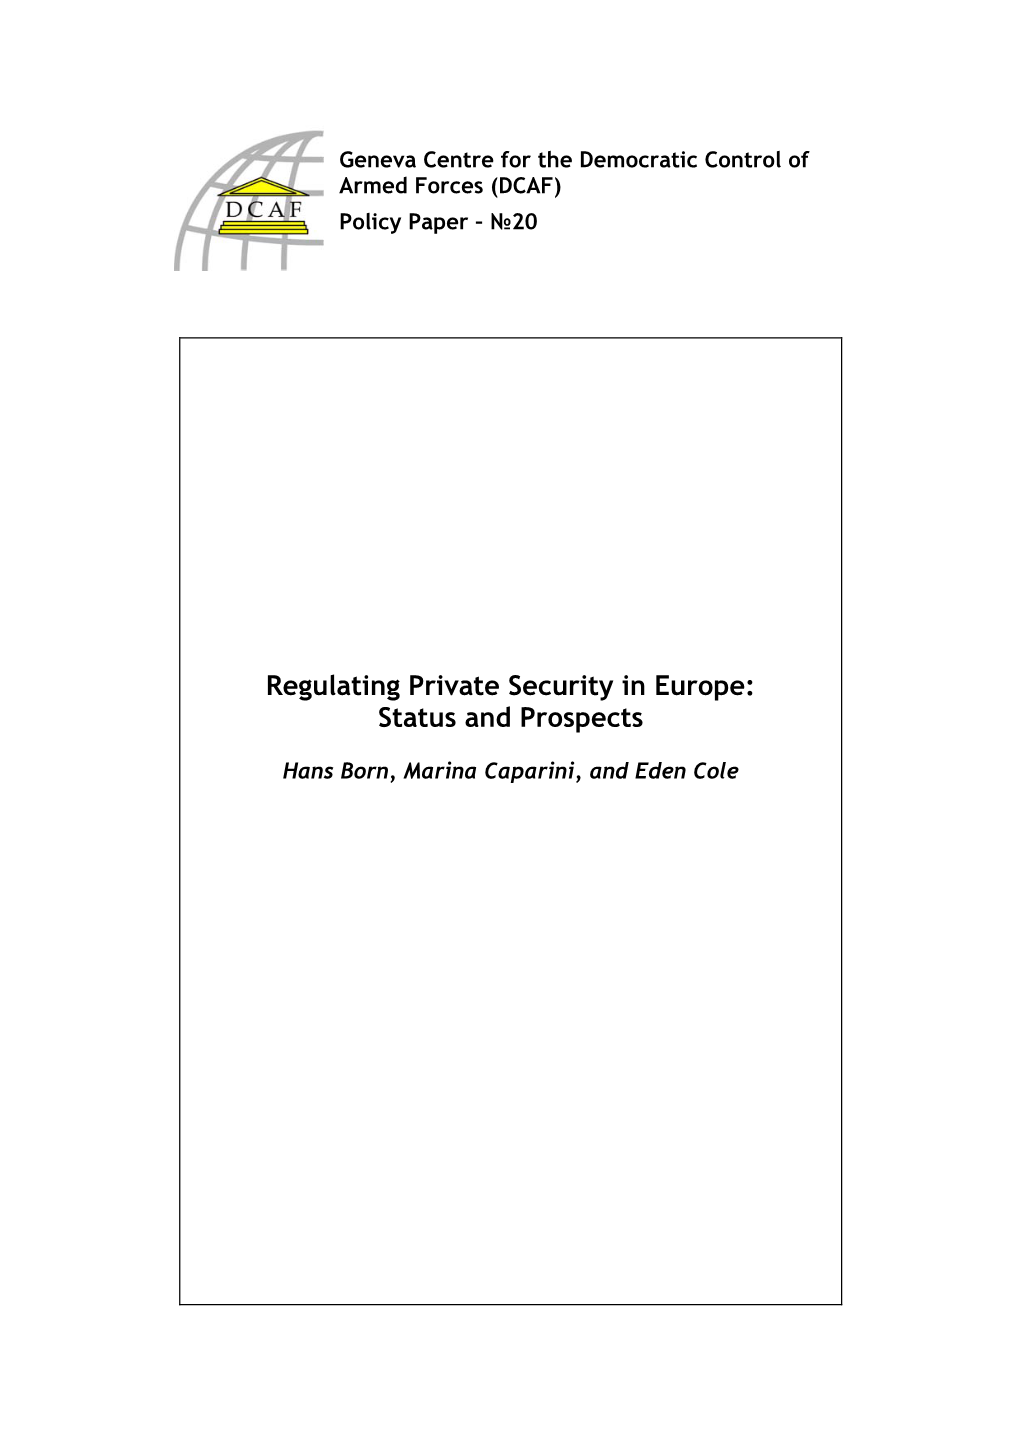 Regulating Private Security in Europe: Status and Prospects